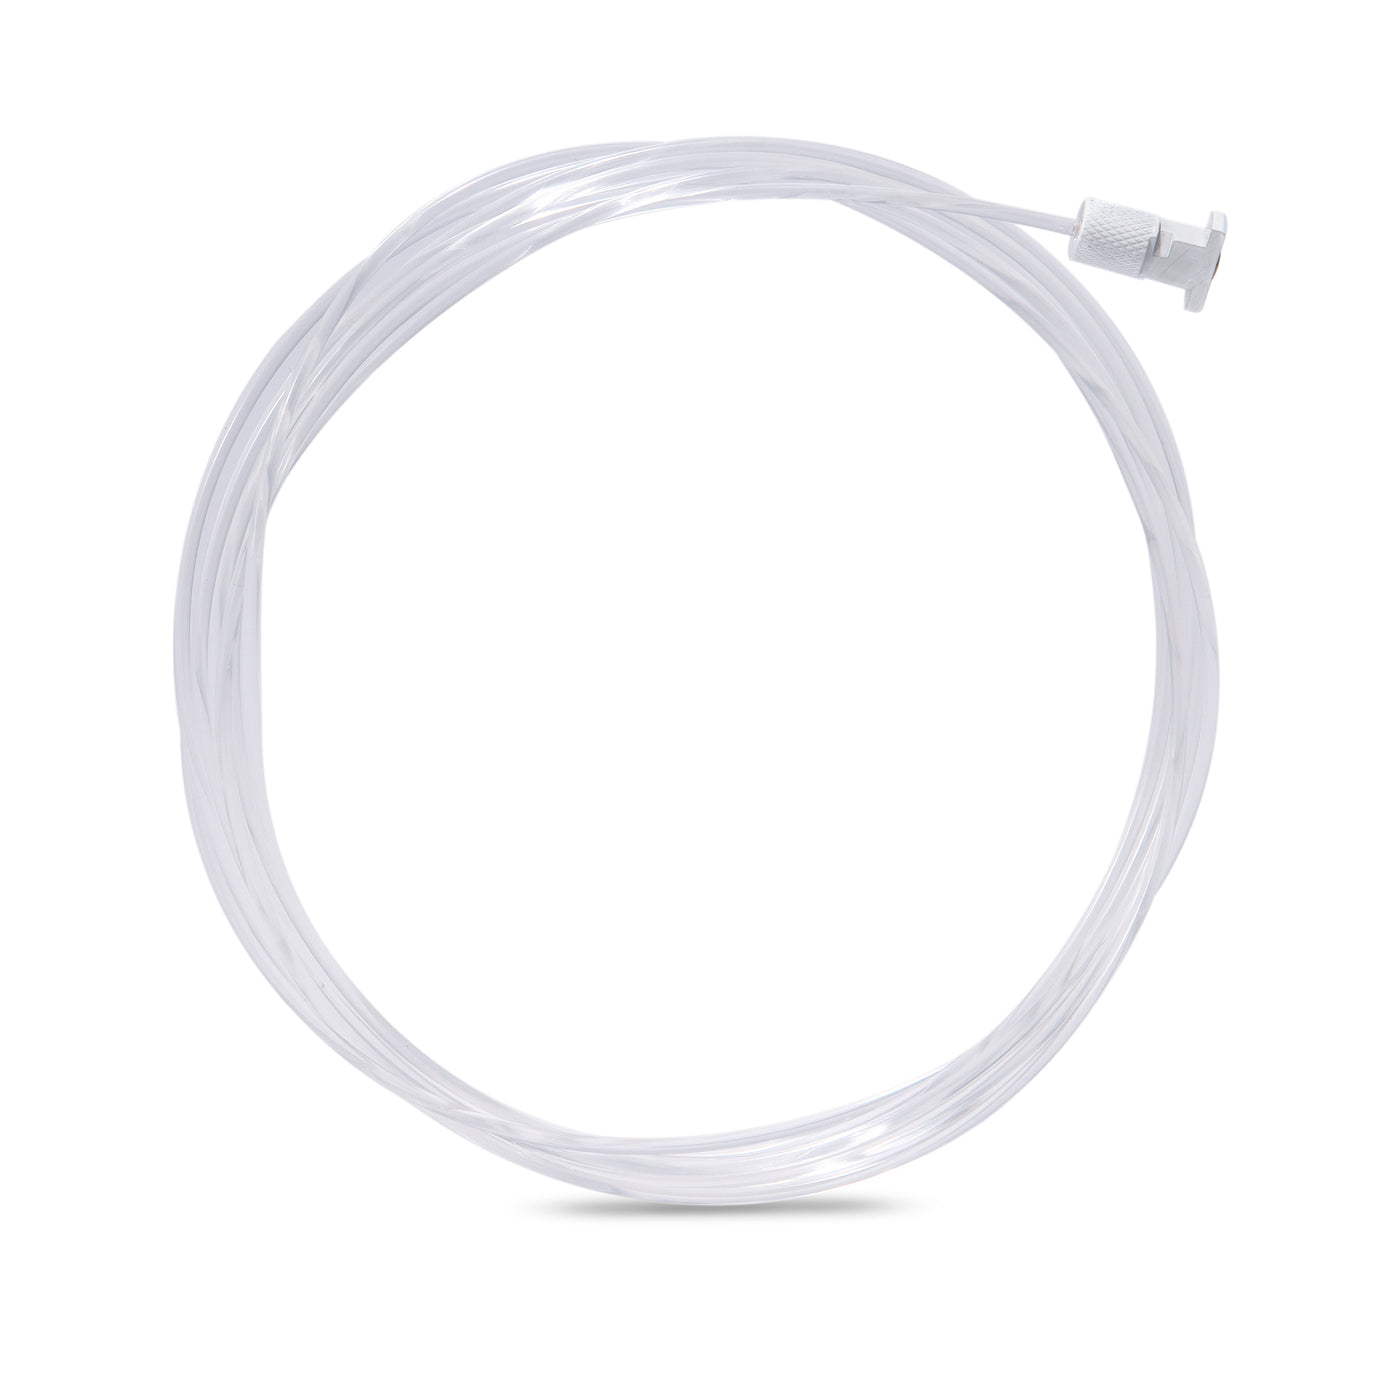 FORTIS SYSTEM CABLE  Clear Nylon T-lock cable 200cm. Capacity up to 10kg (FTNT2)